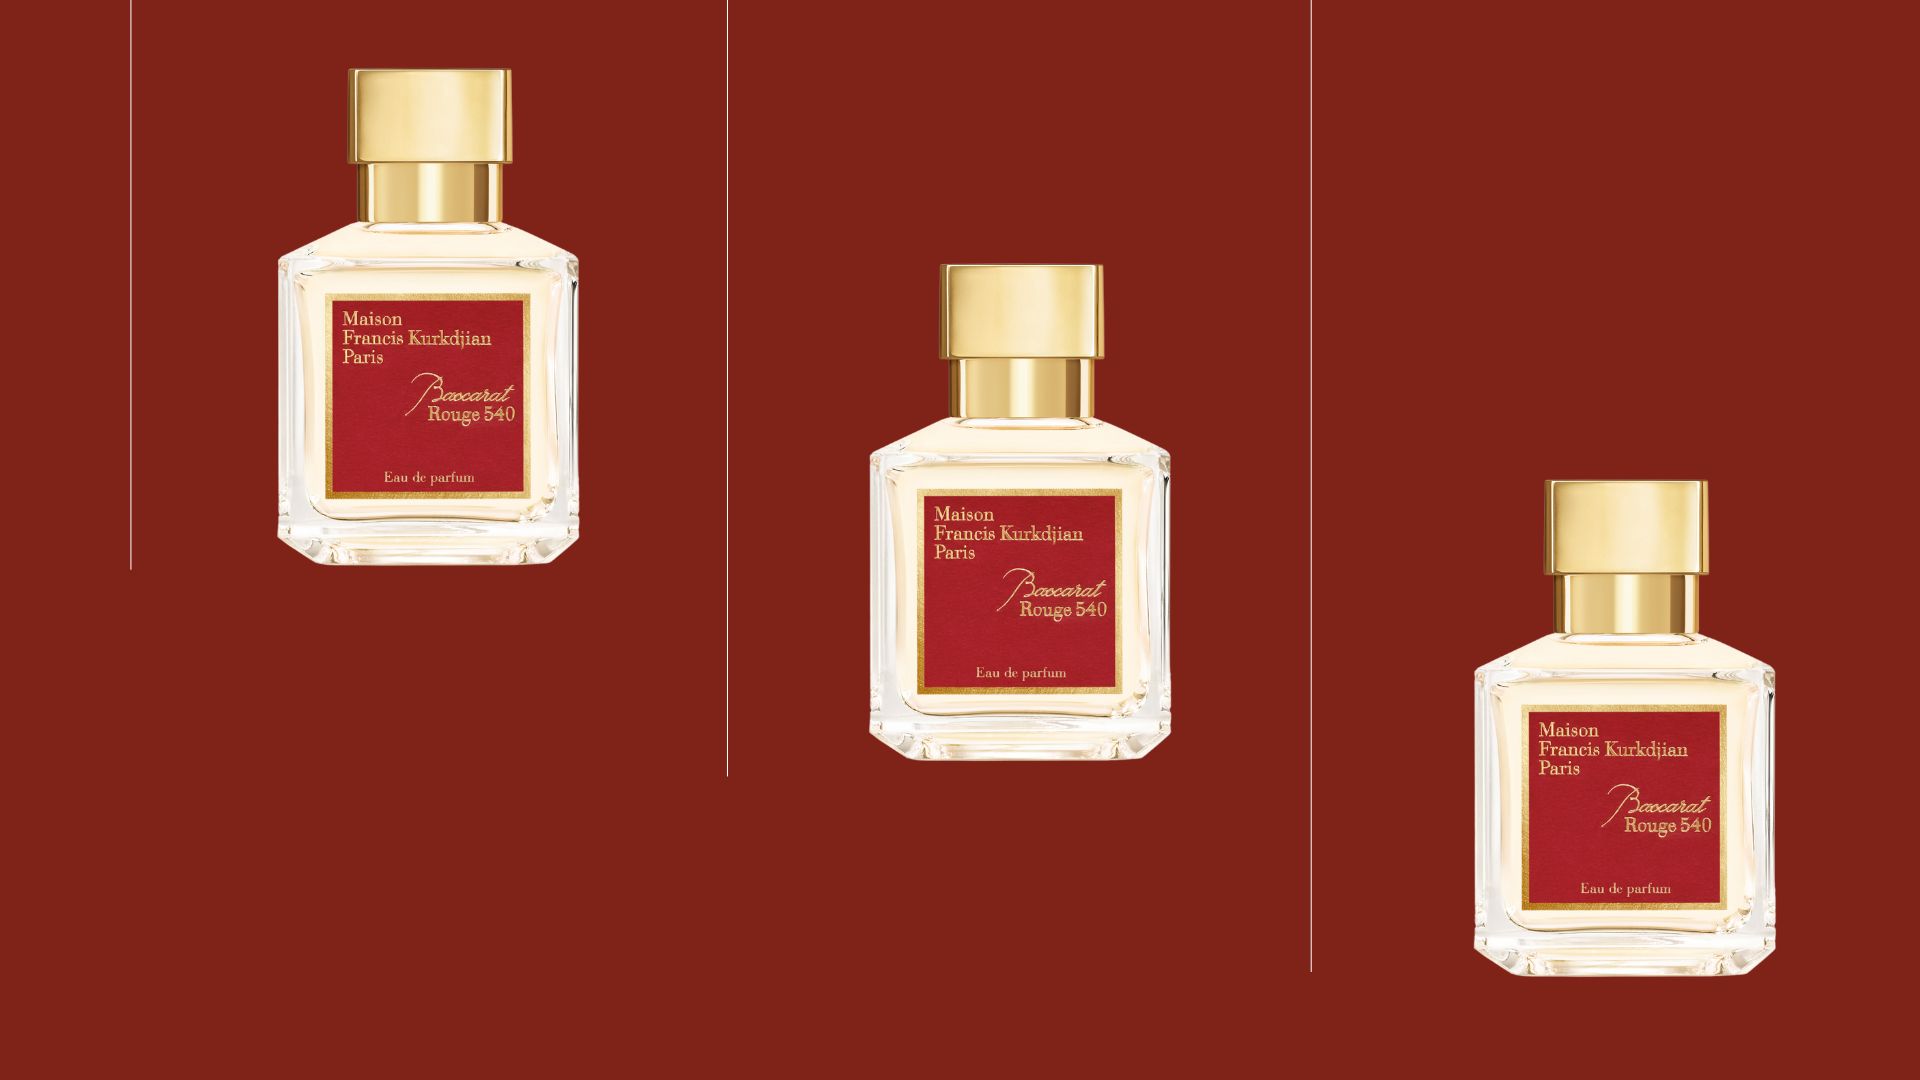 These Baccarat Rouge 540 swaps smell just as expensive